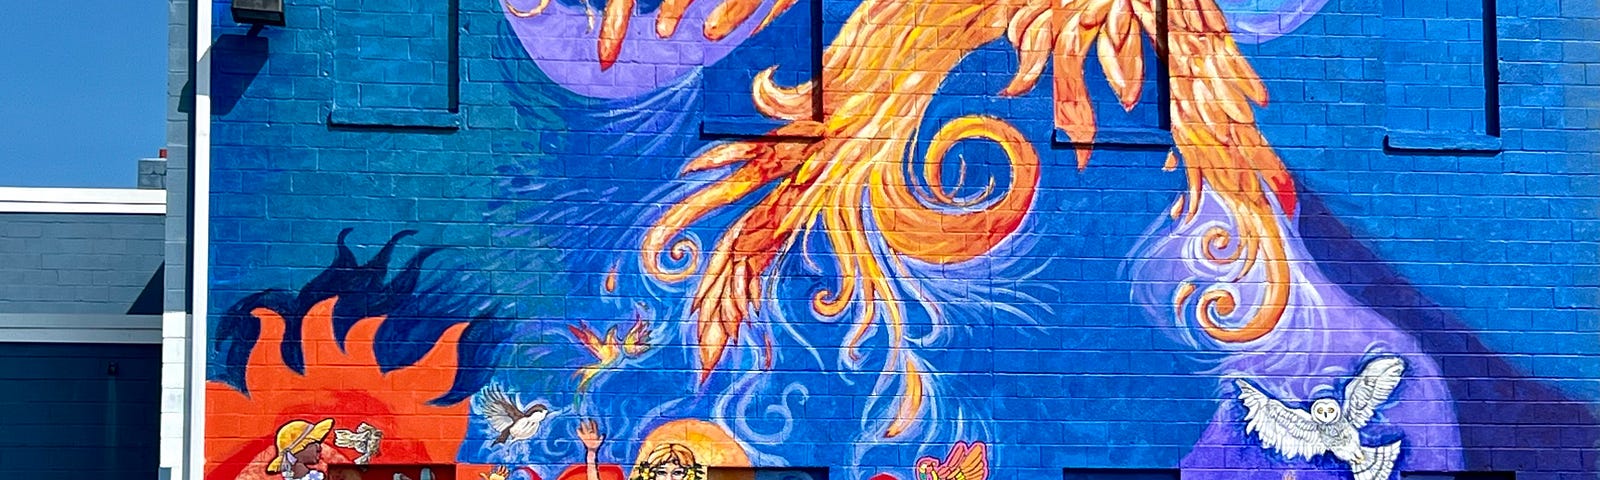 Mural with phoenix rising; six figures release birds to the sky